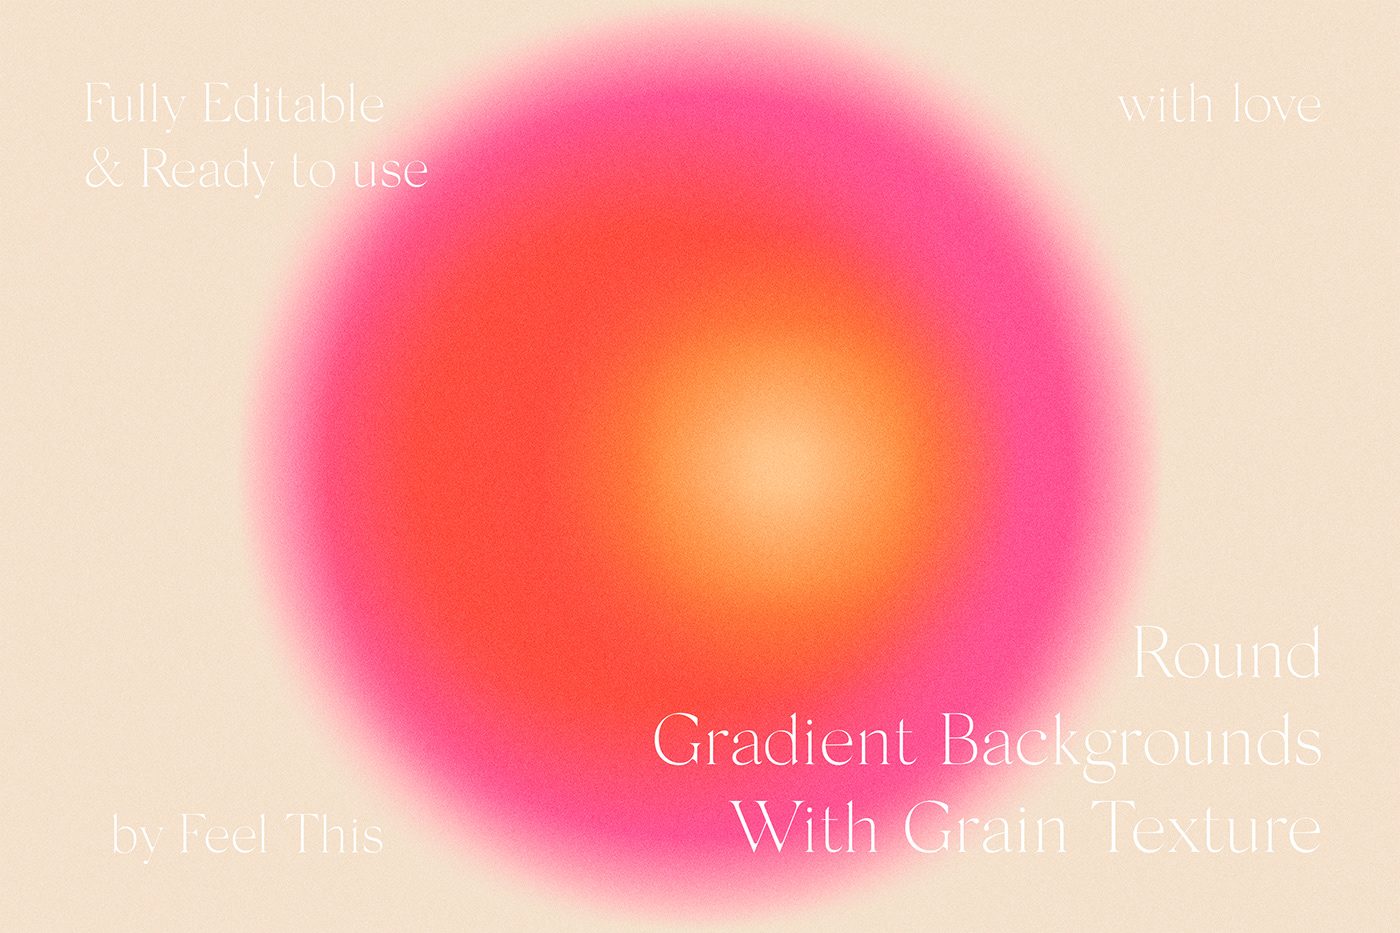 Round Circle Gradient Background With Grain Texture Ps On